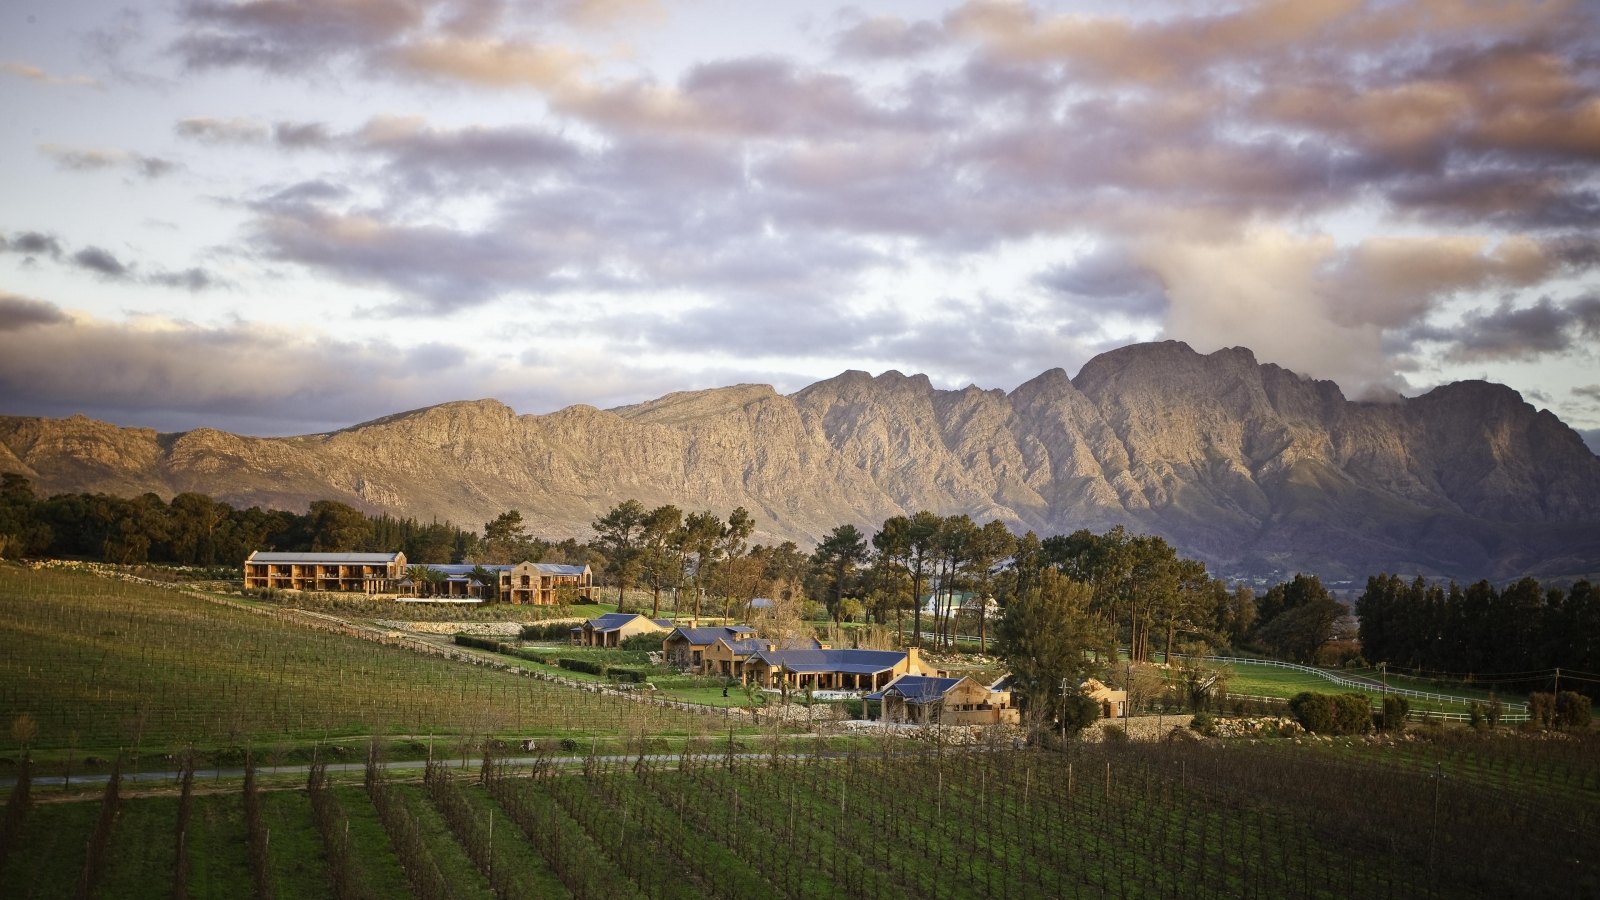 La Residence is surrounded by the Franschhoek Valley